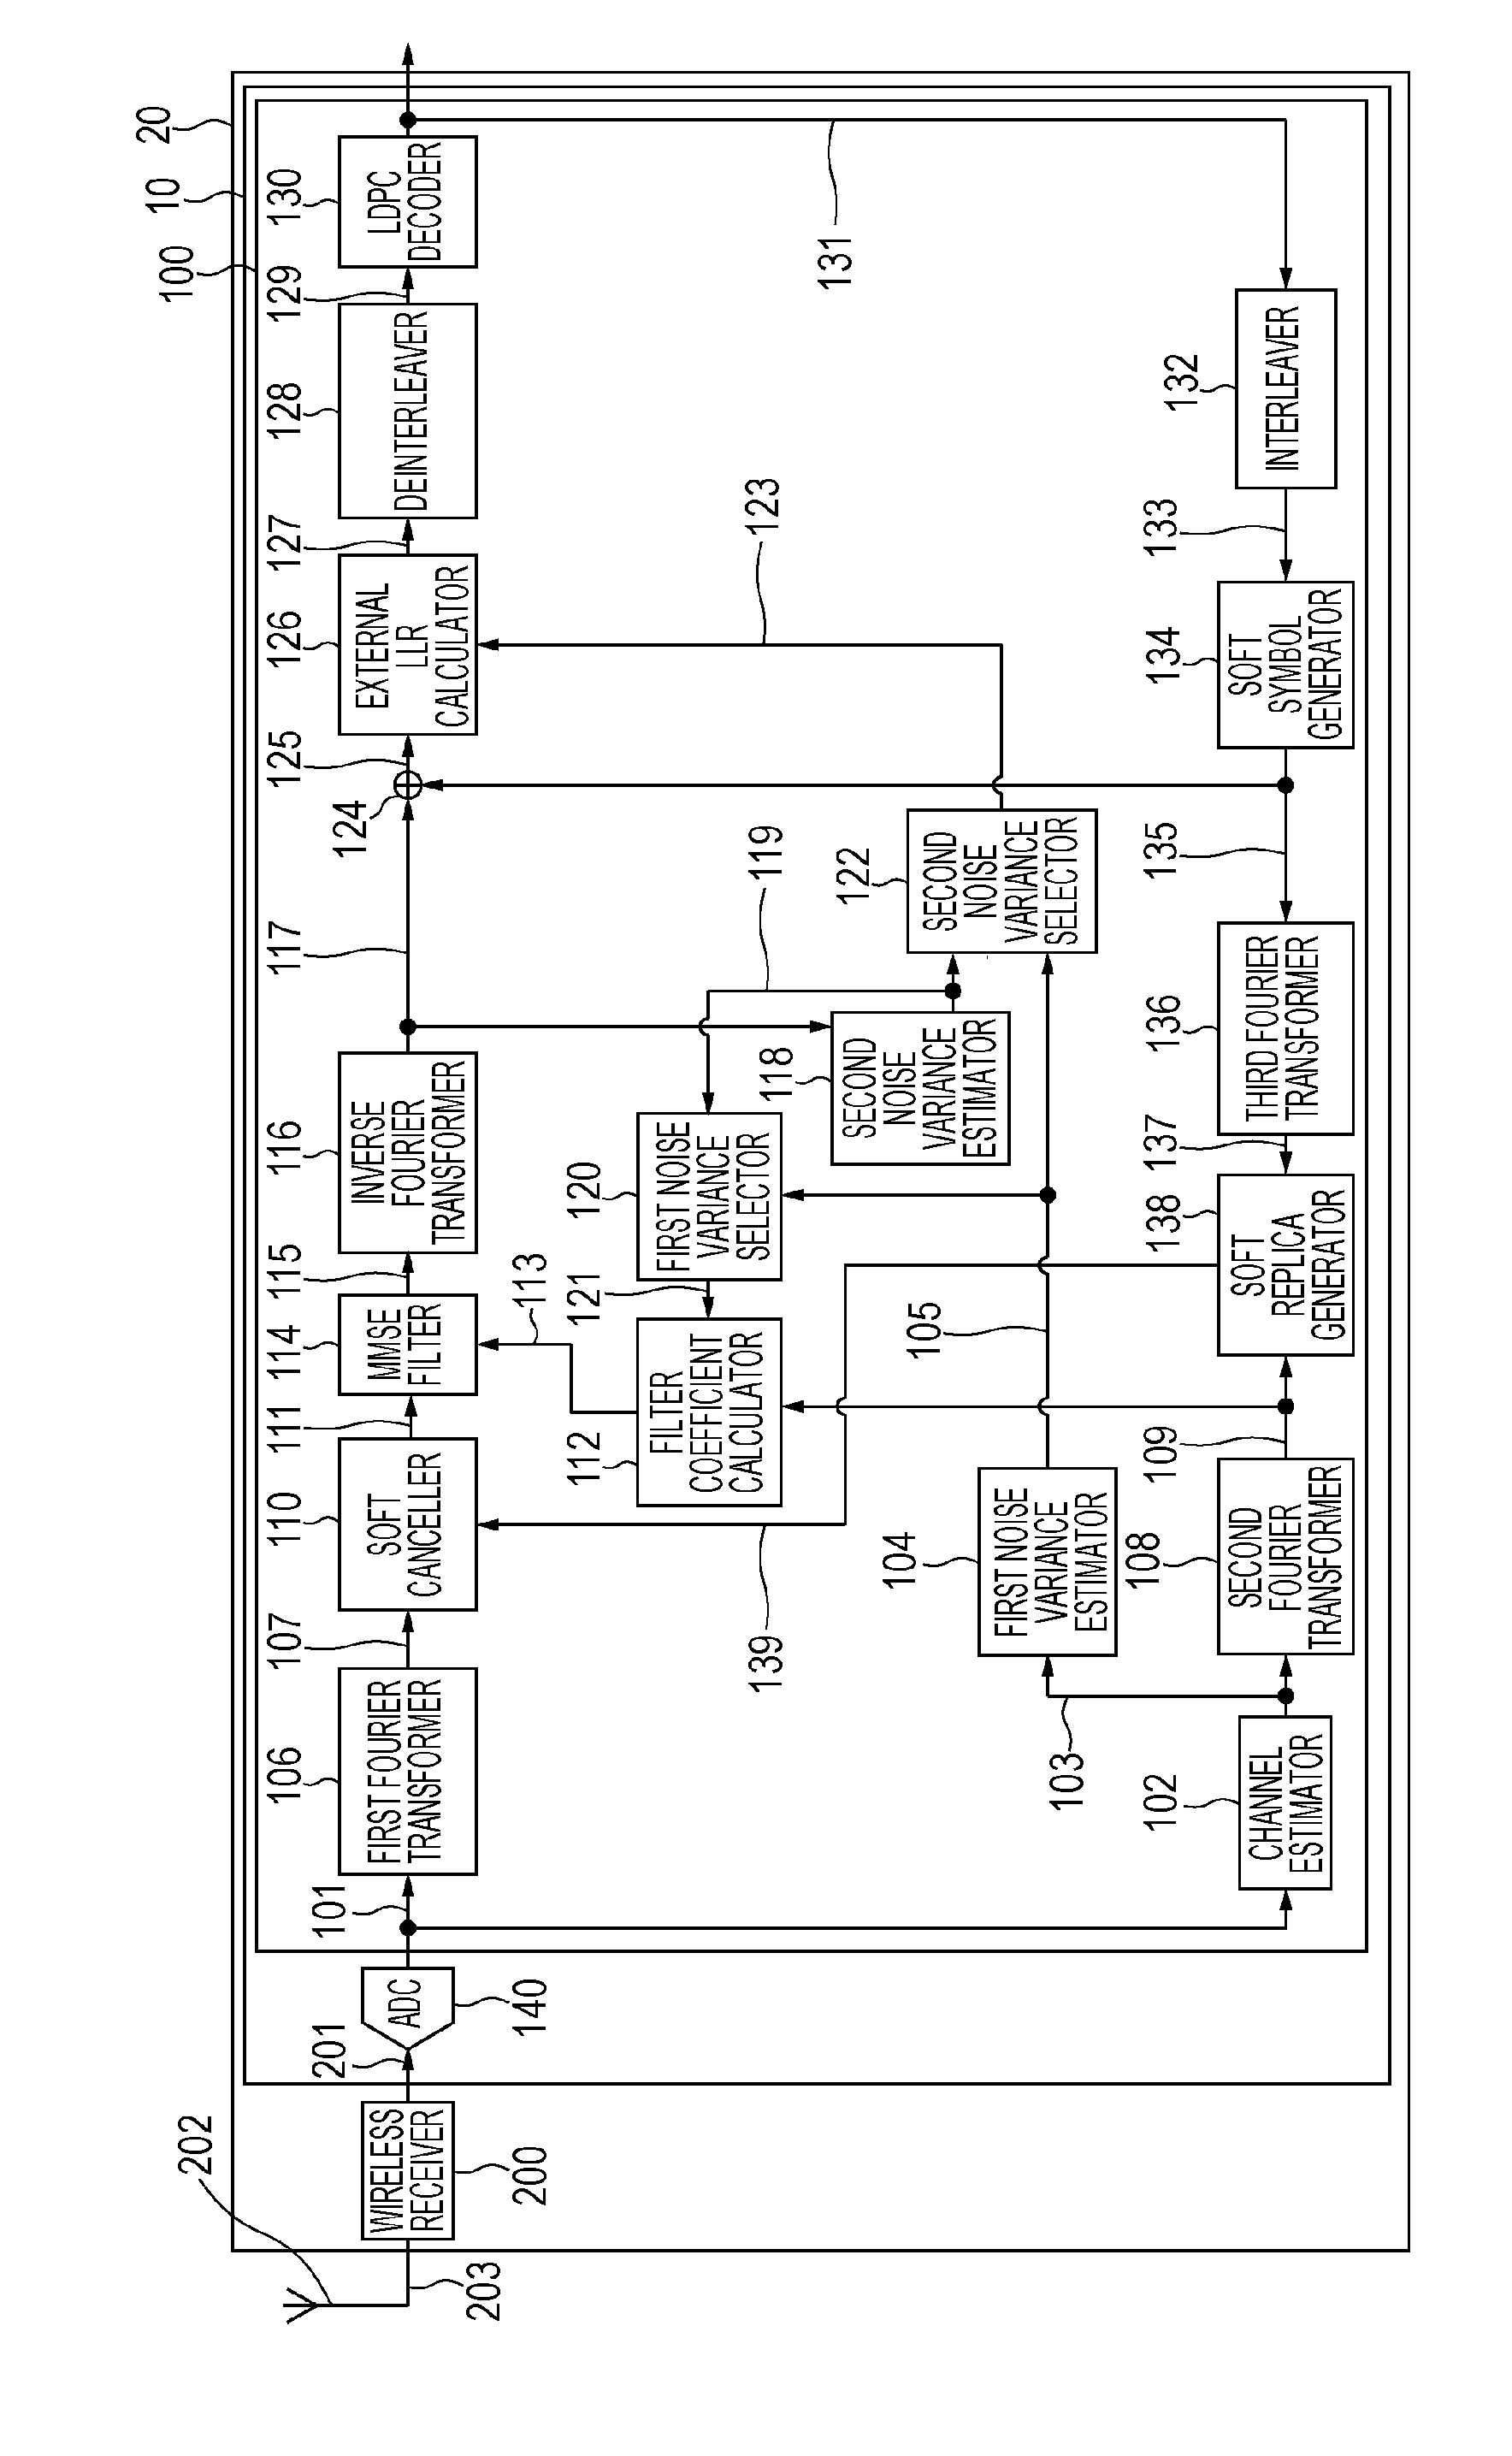 Turbo equalizer and wireless receiving apparatus